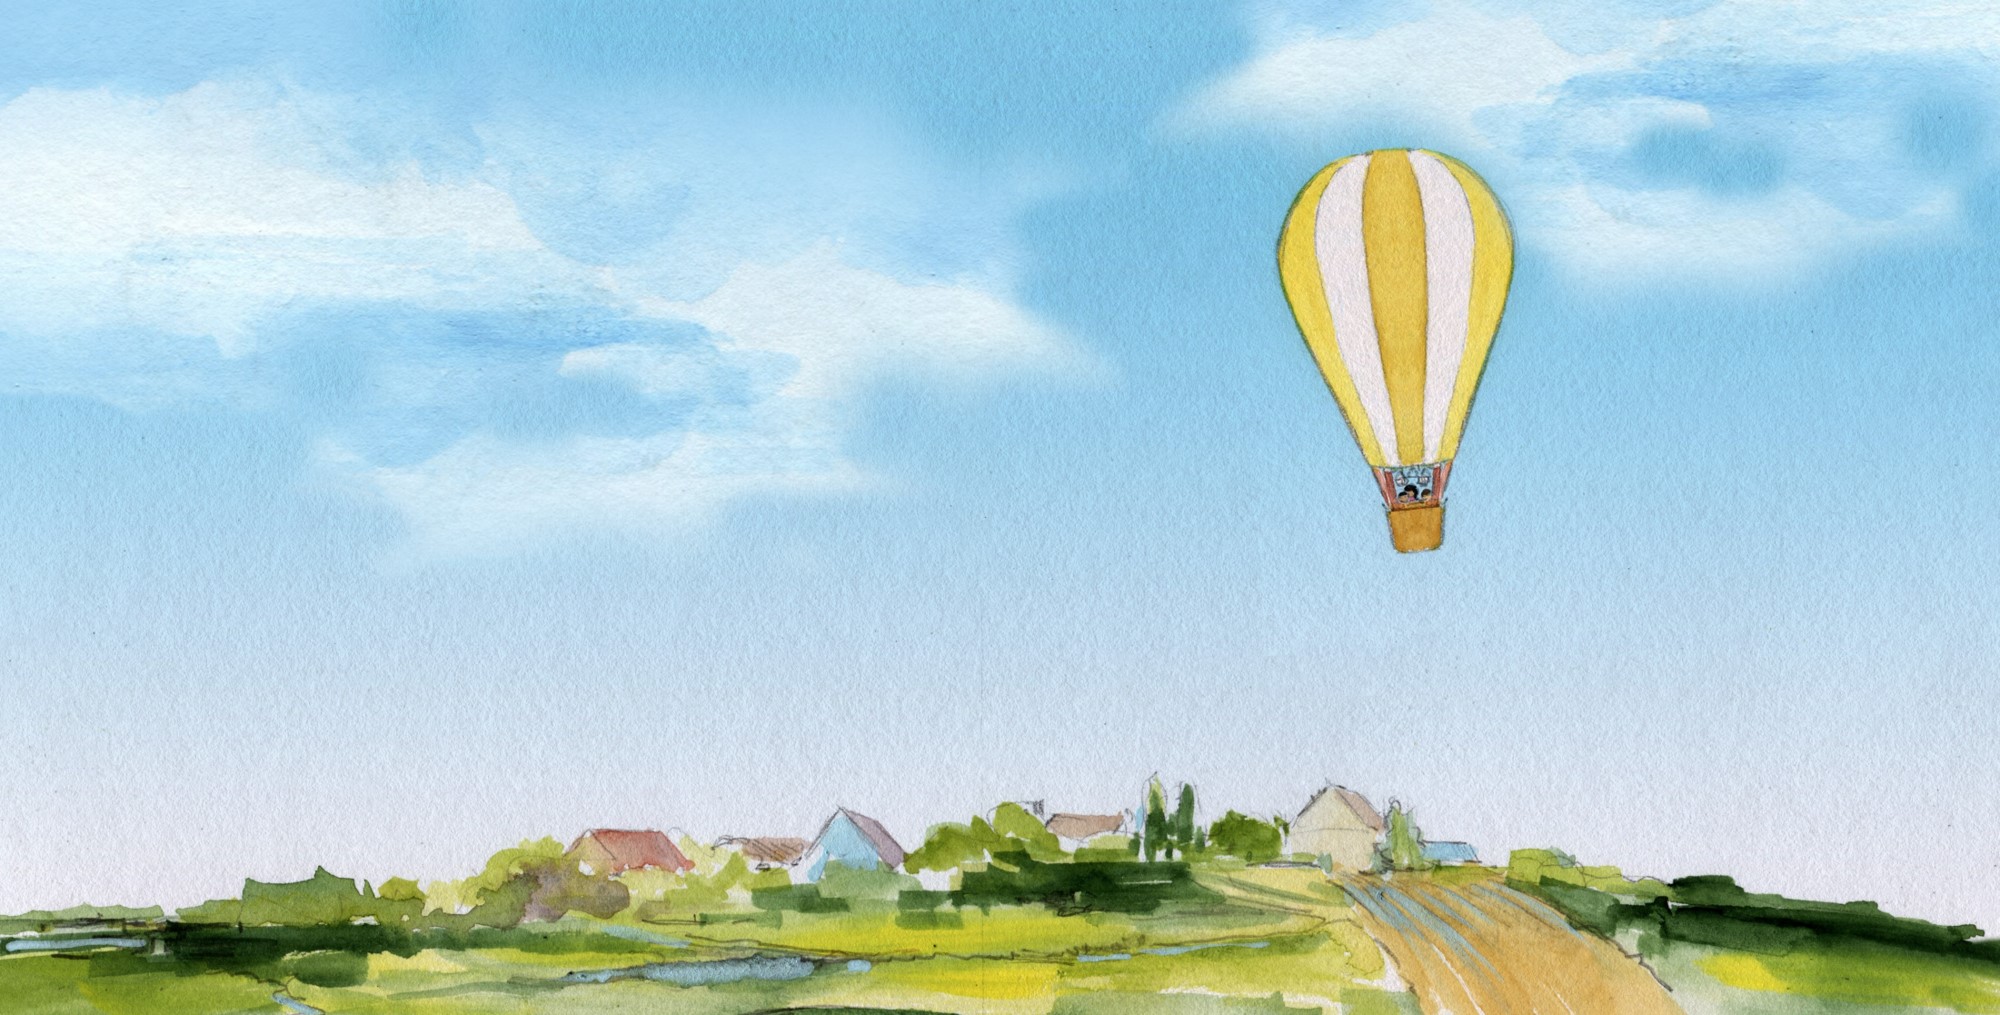 Bo, Go Up! by Larry Baum: Hot Air Balloon Illustration by Joanna Pasek